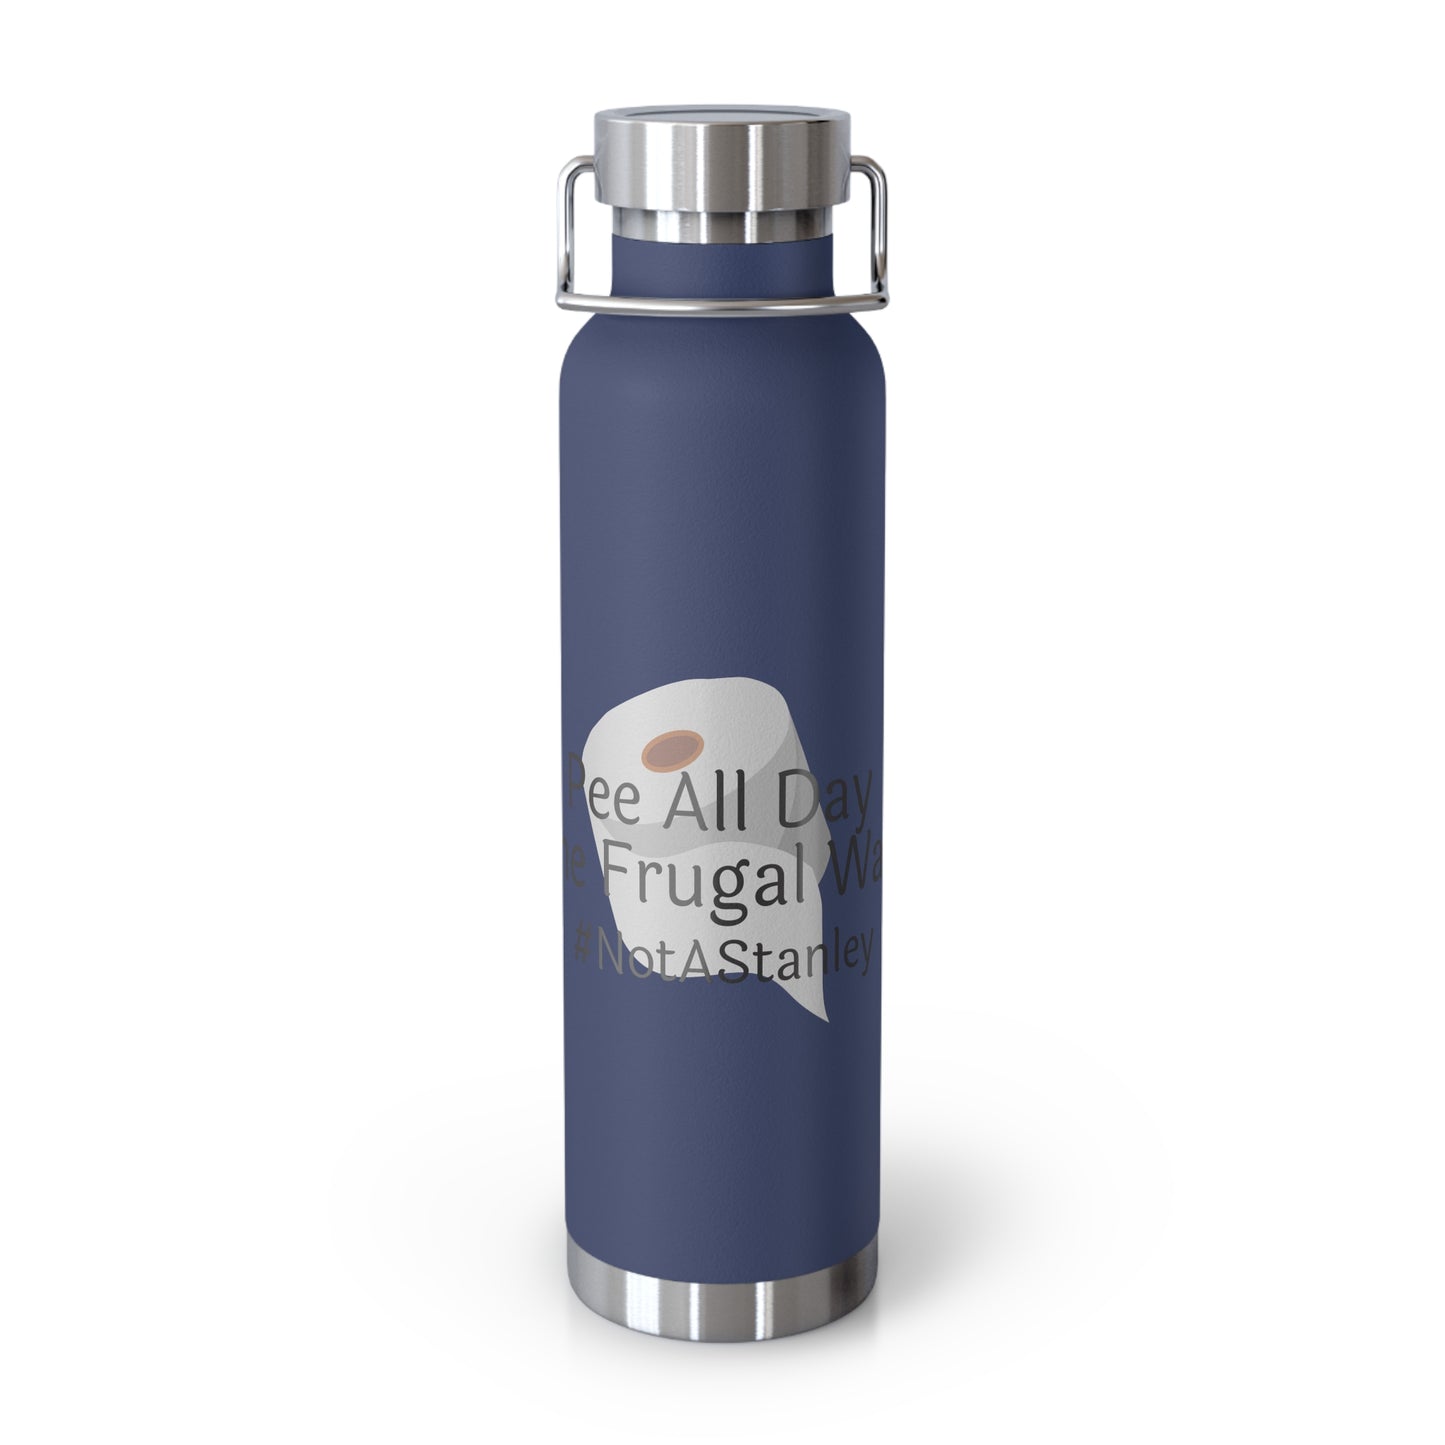 Pee All Day The Frugal Way #notastanley - Copper Vacuum Insulated Bottle, 22oz